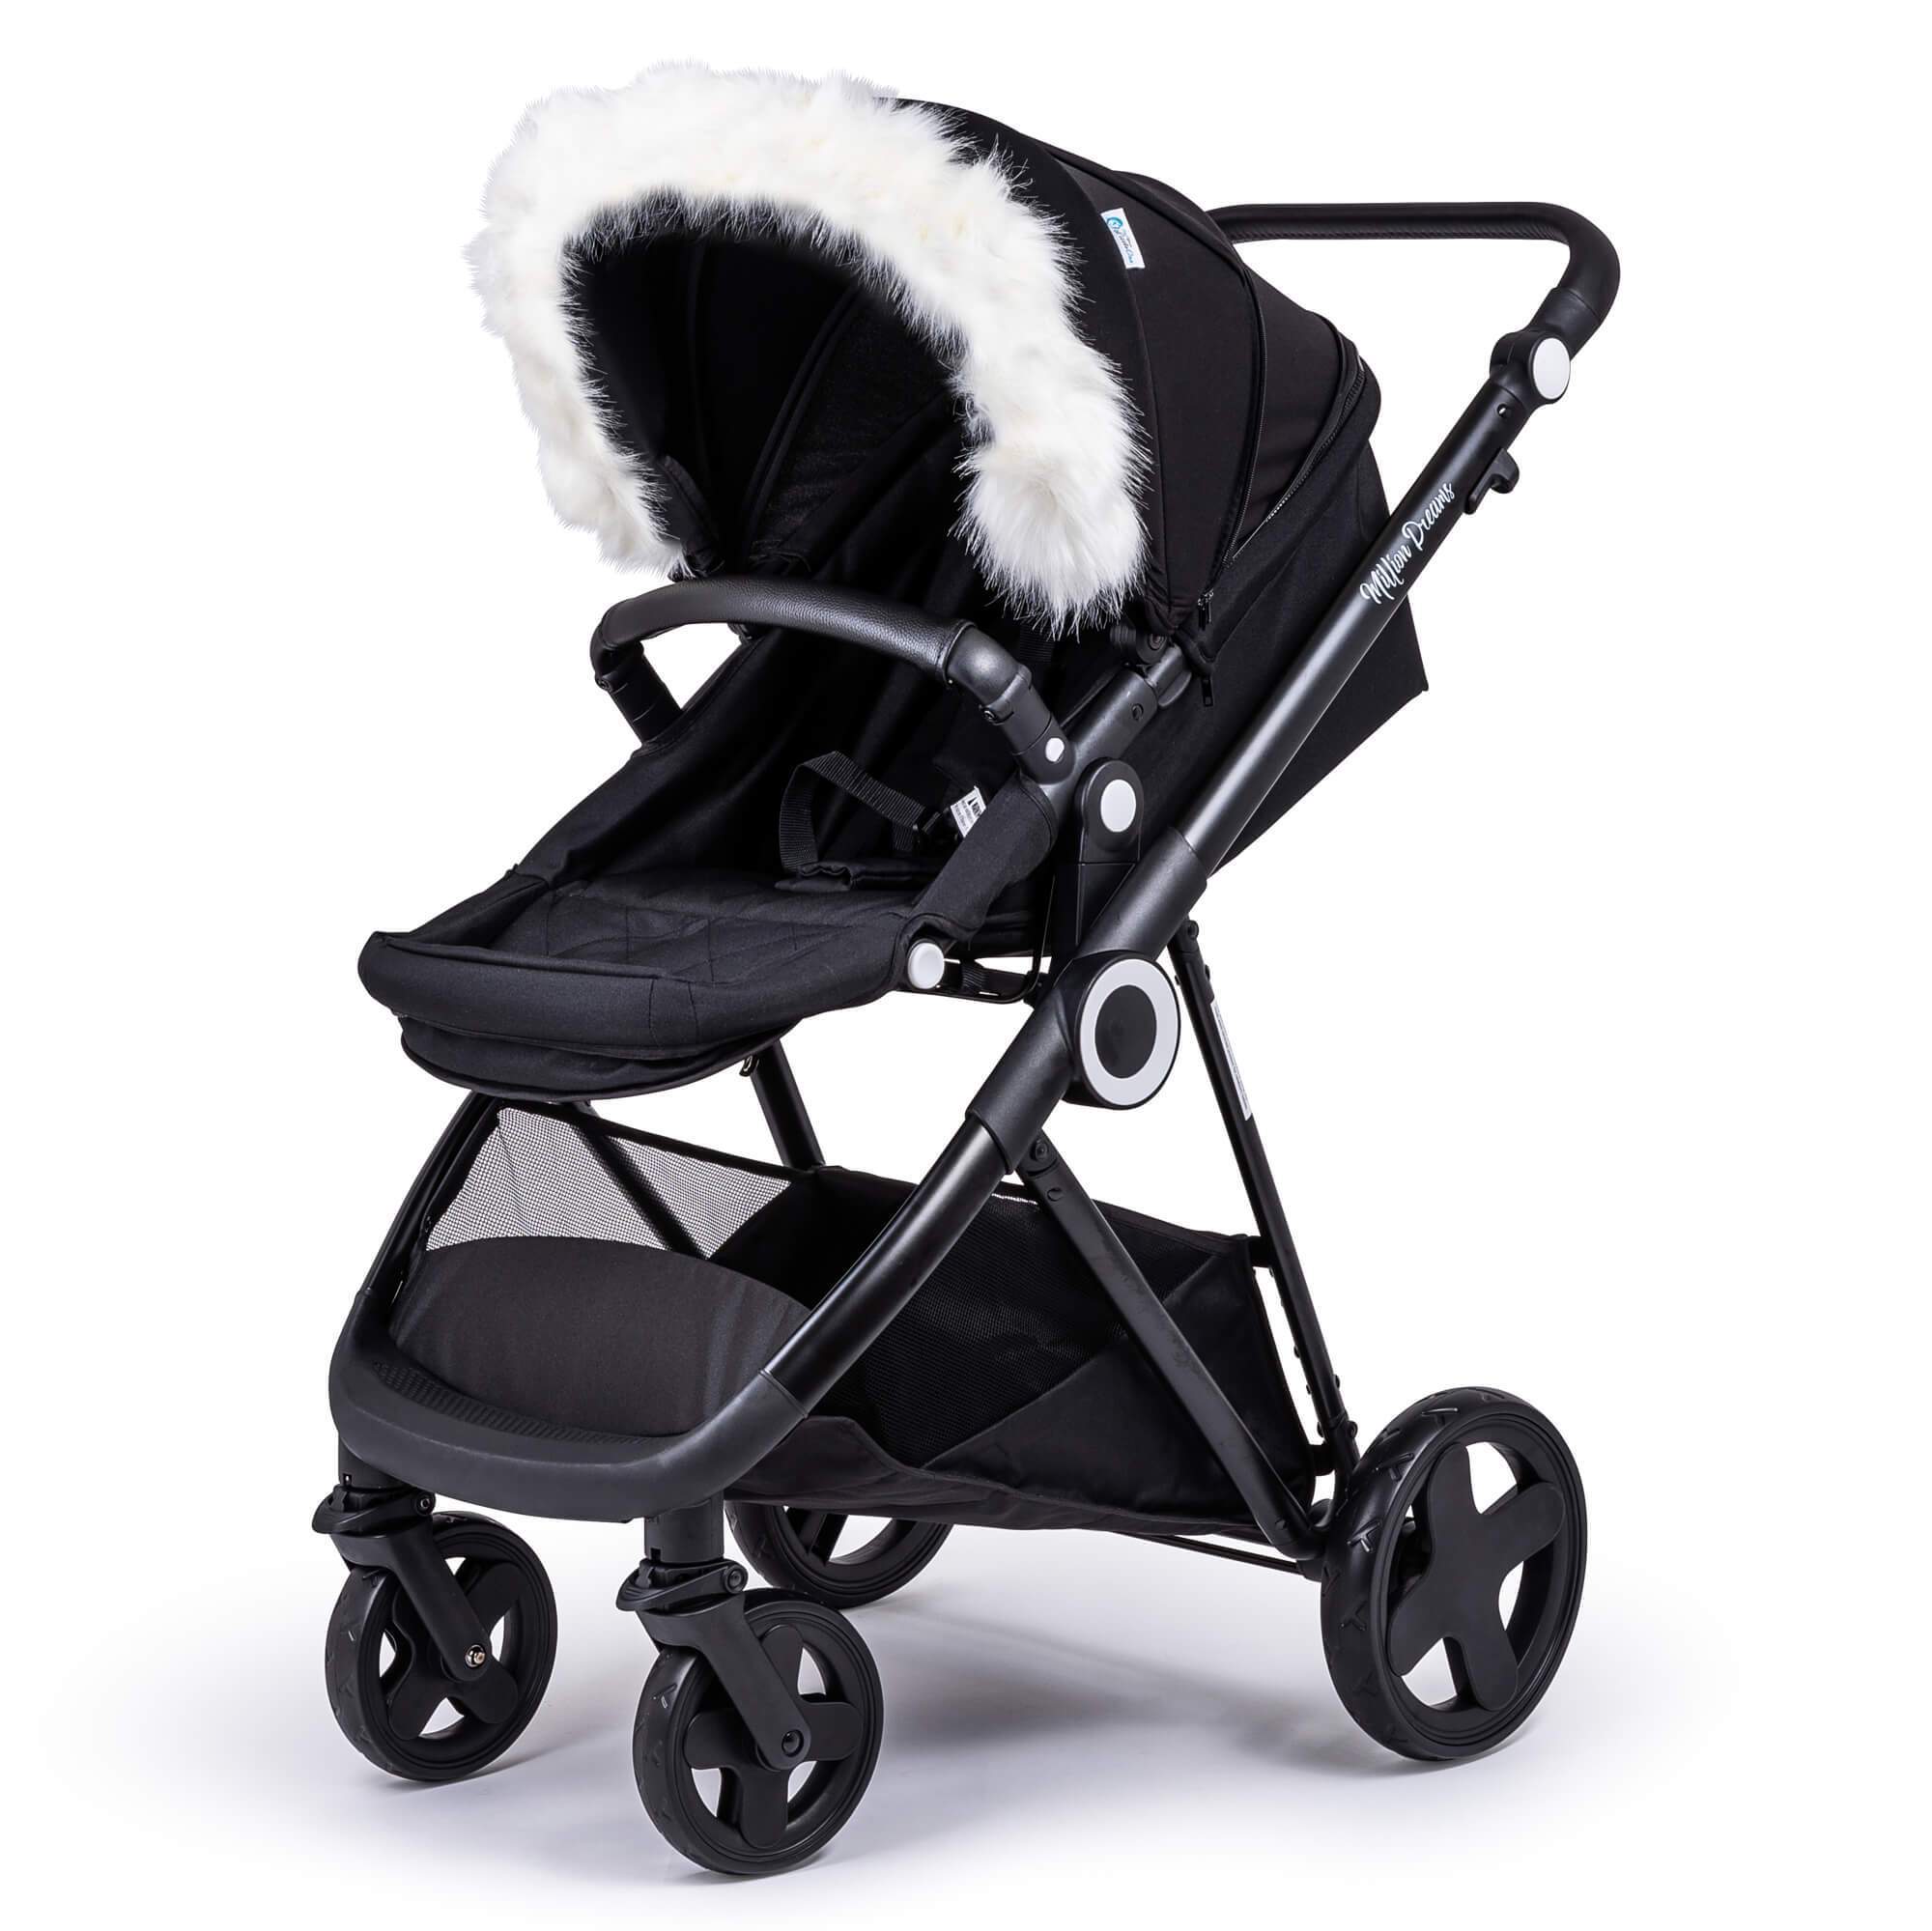 Pram Fur Hood Trim Attachment For Pushchair Compatible with Mee-Go - White / Fits All Models | For Your Little One